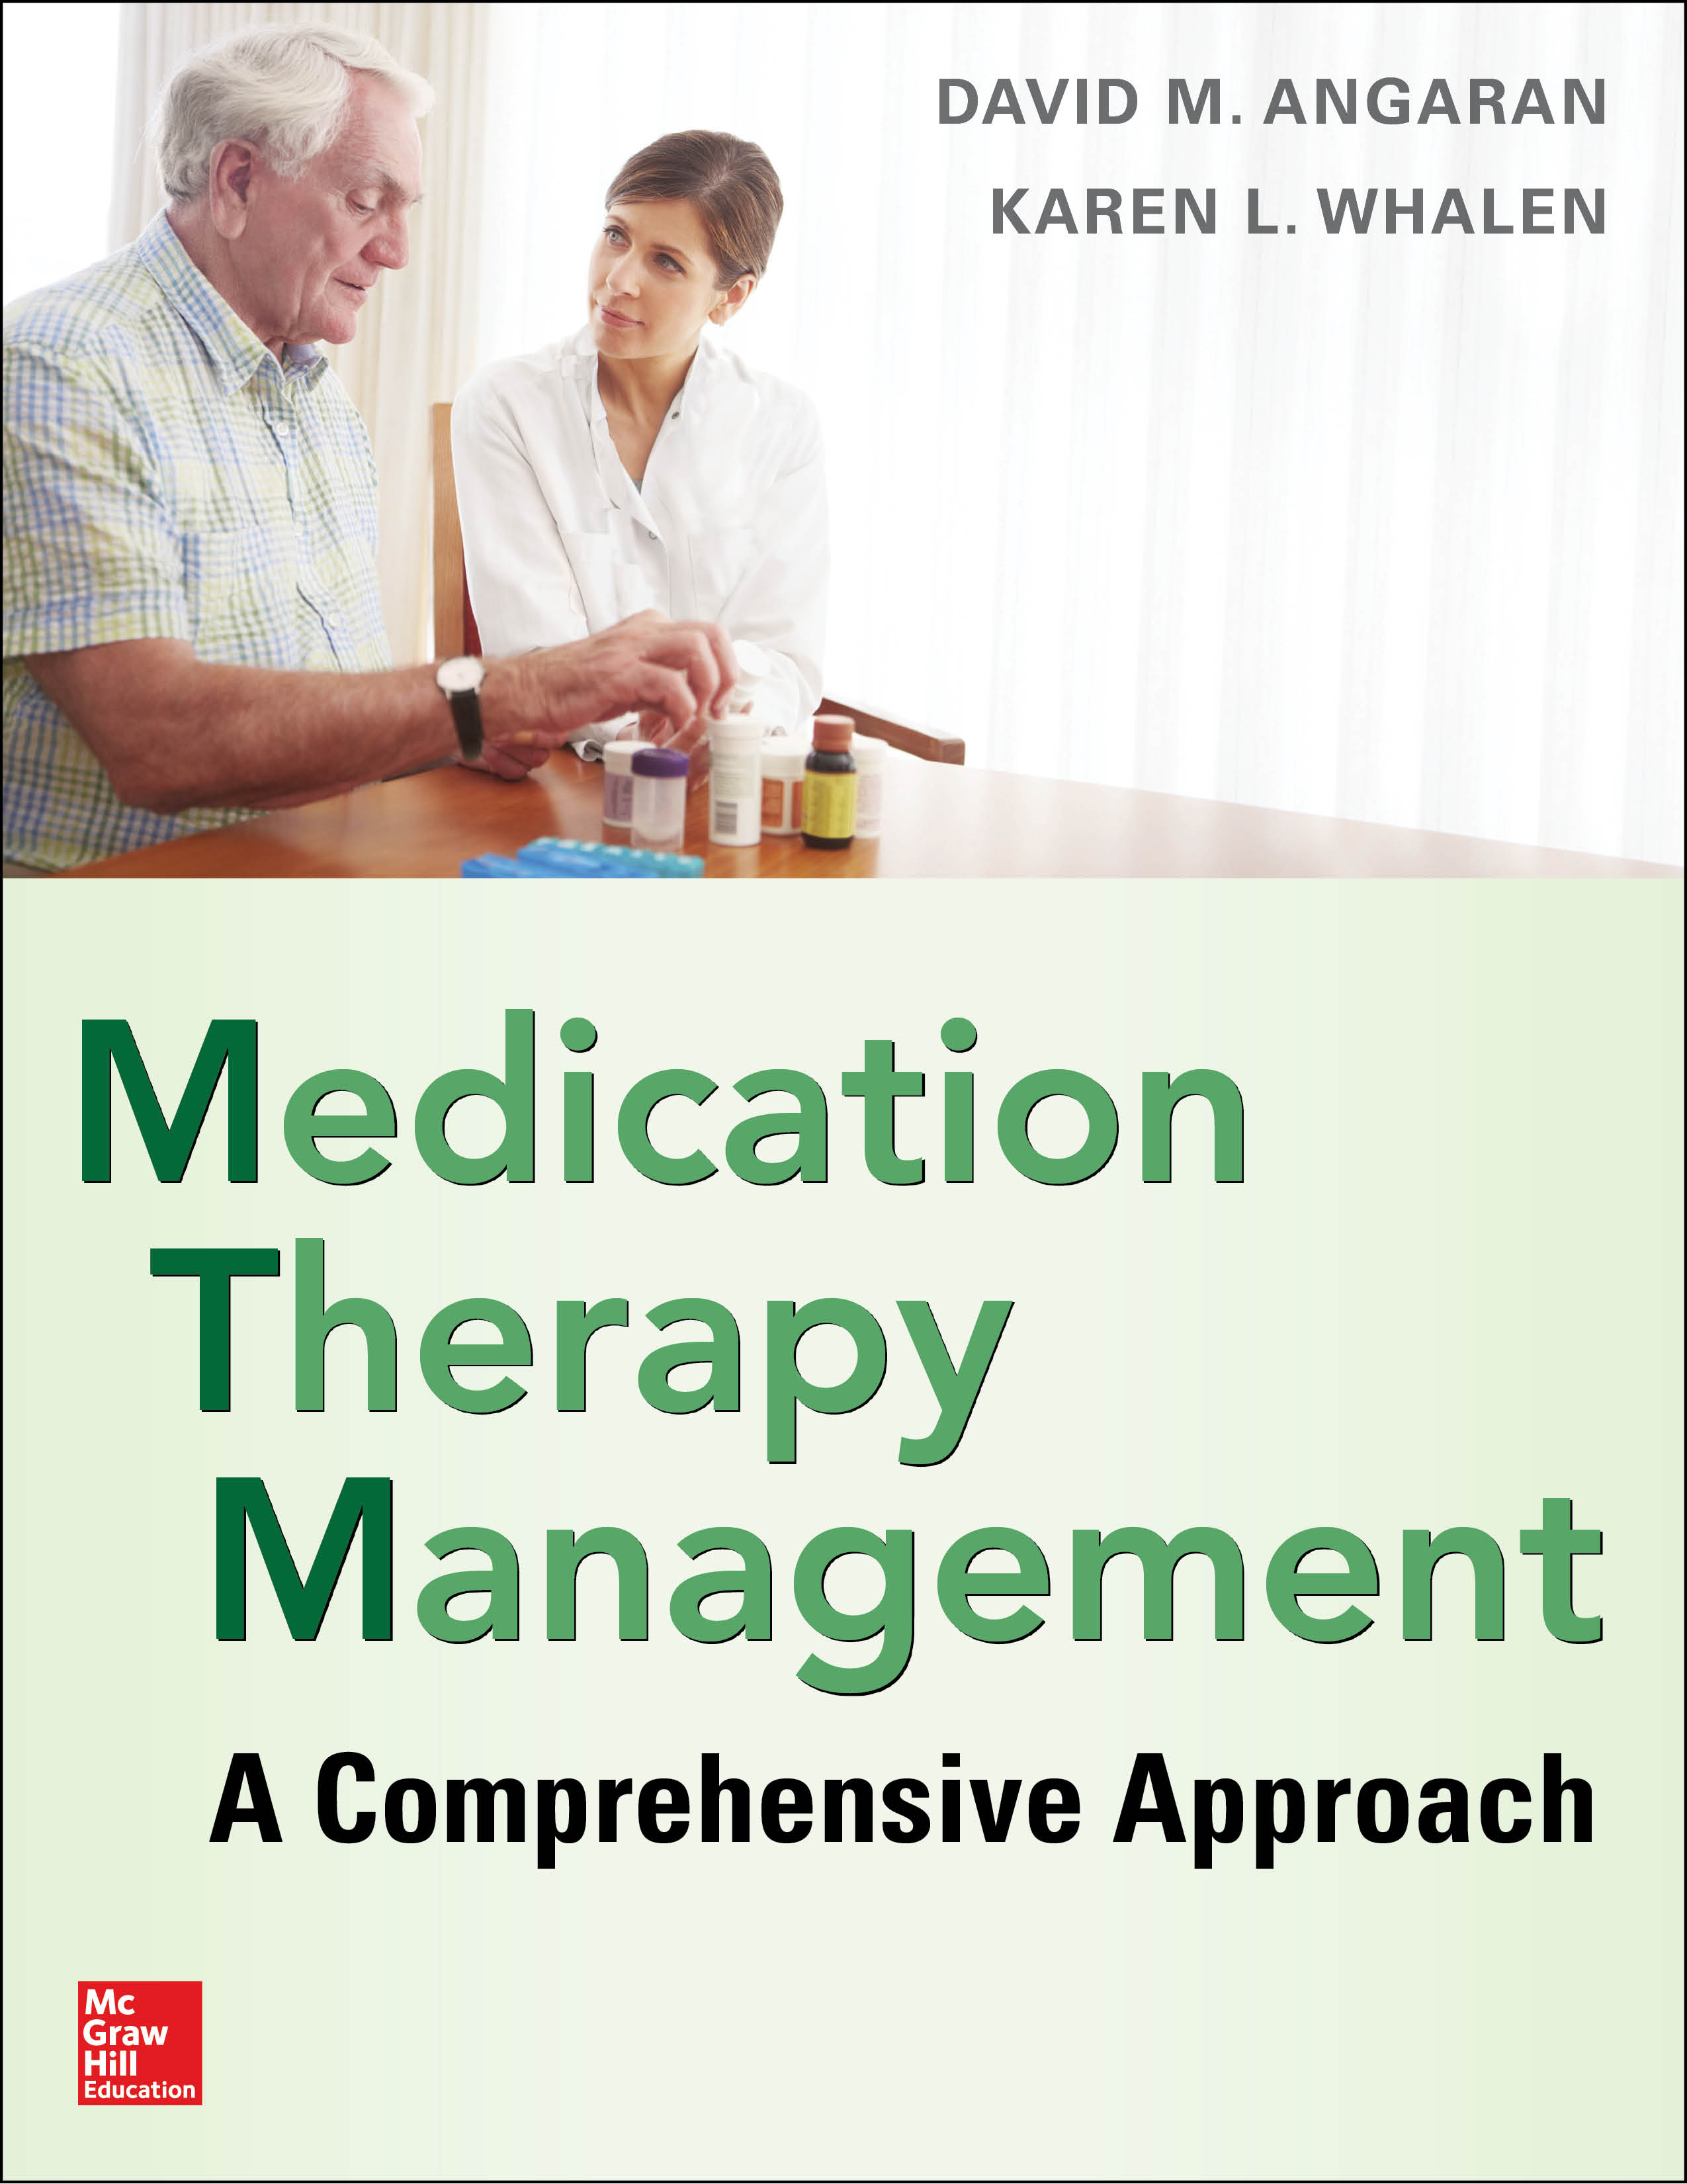 textbook of therapeutics drug and disease management pdf free download